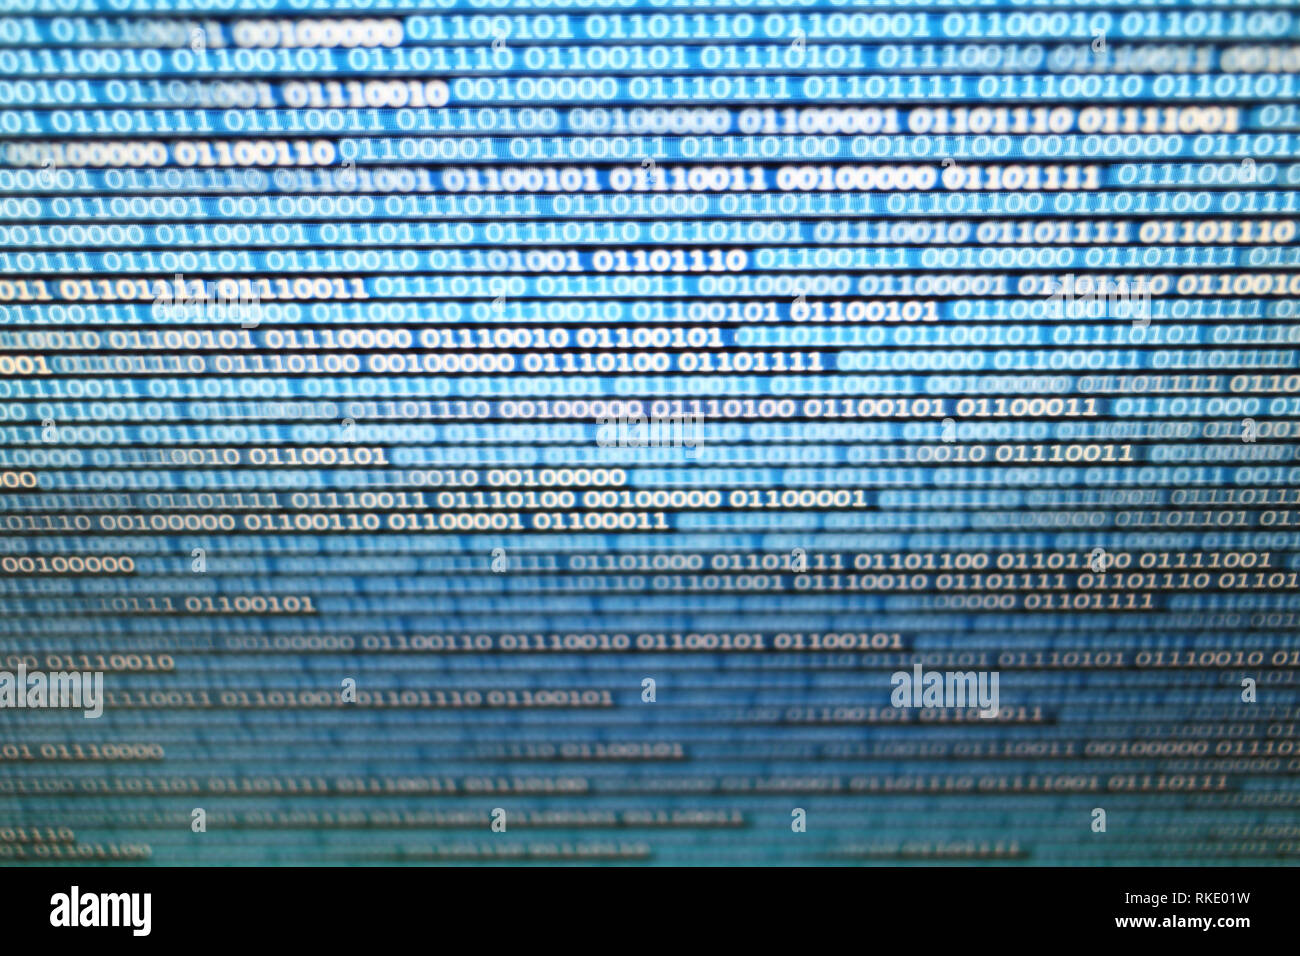 binary data on computer monitor. multiple layers of codes streaming signifying transferring information over internet medium. Stock Photo